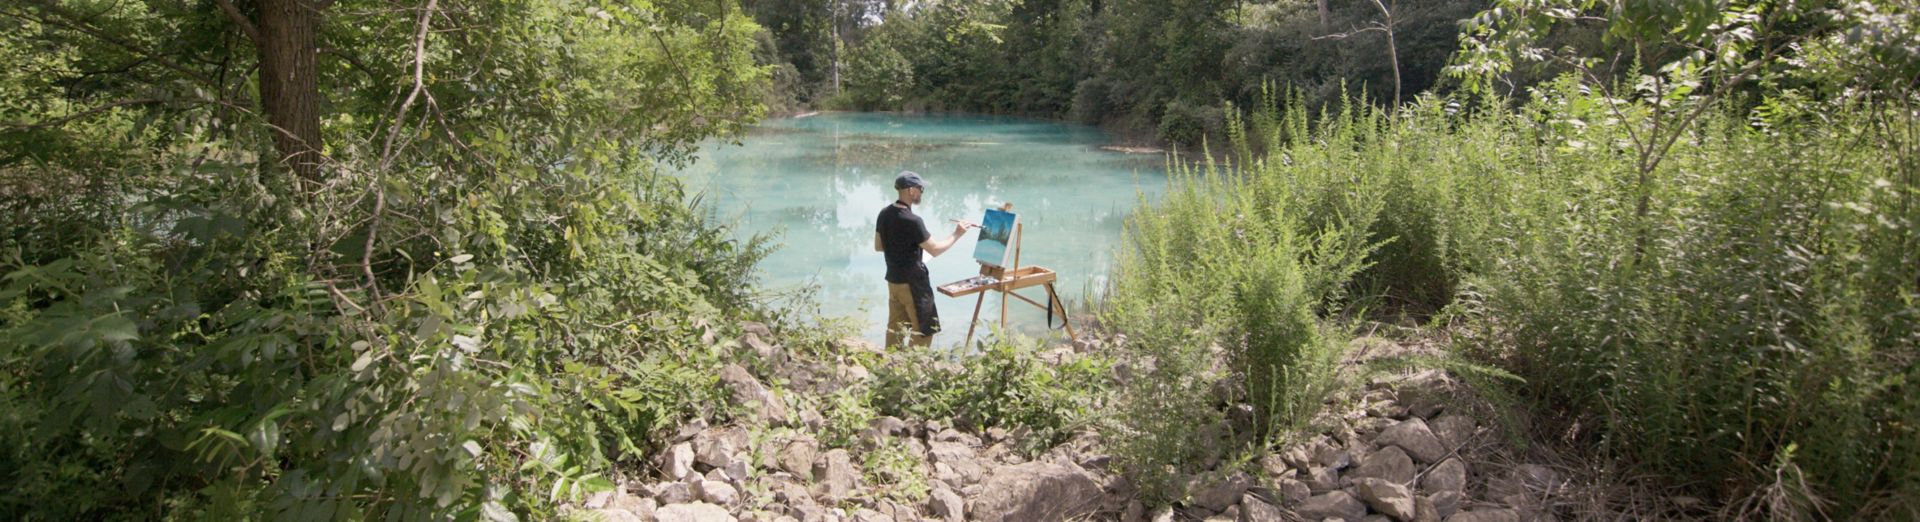 Artist paints on a canvas in front of a river